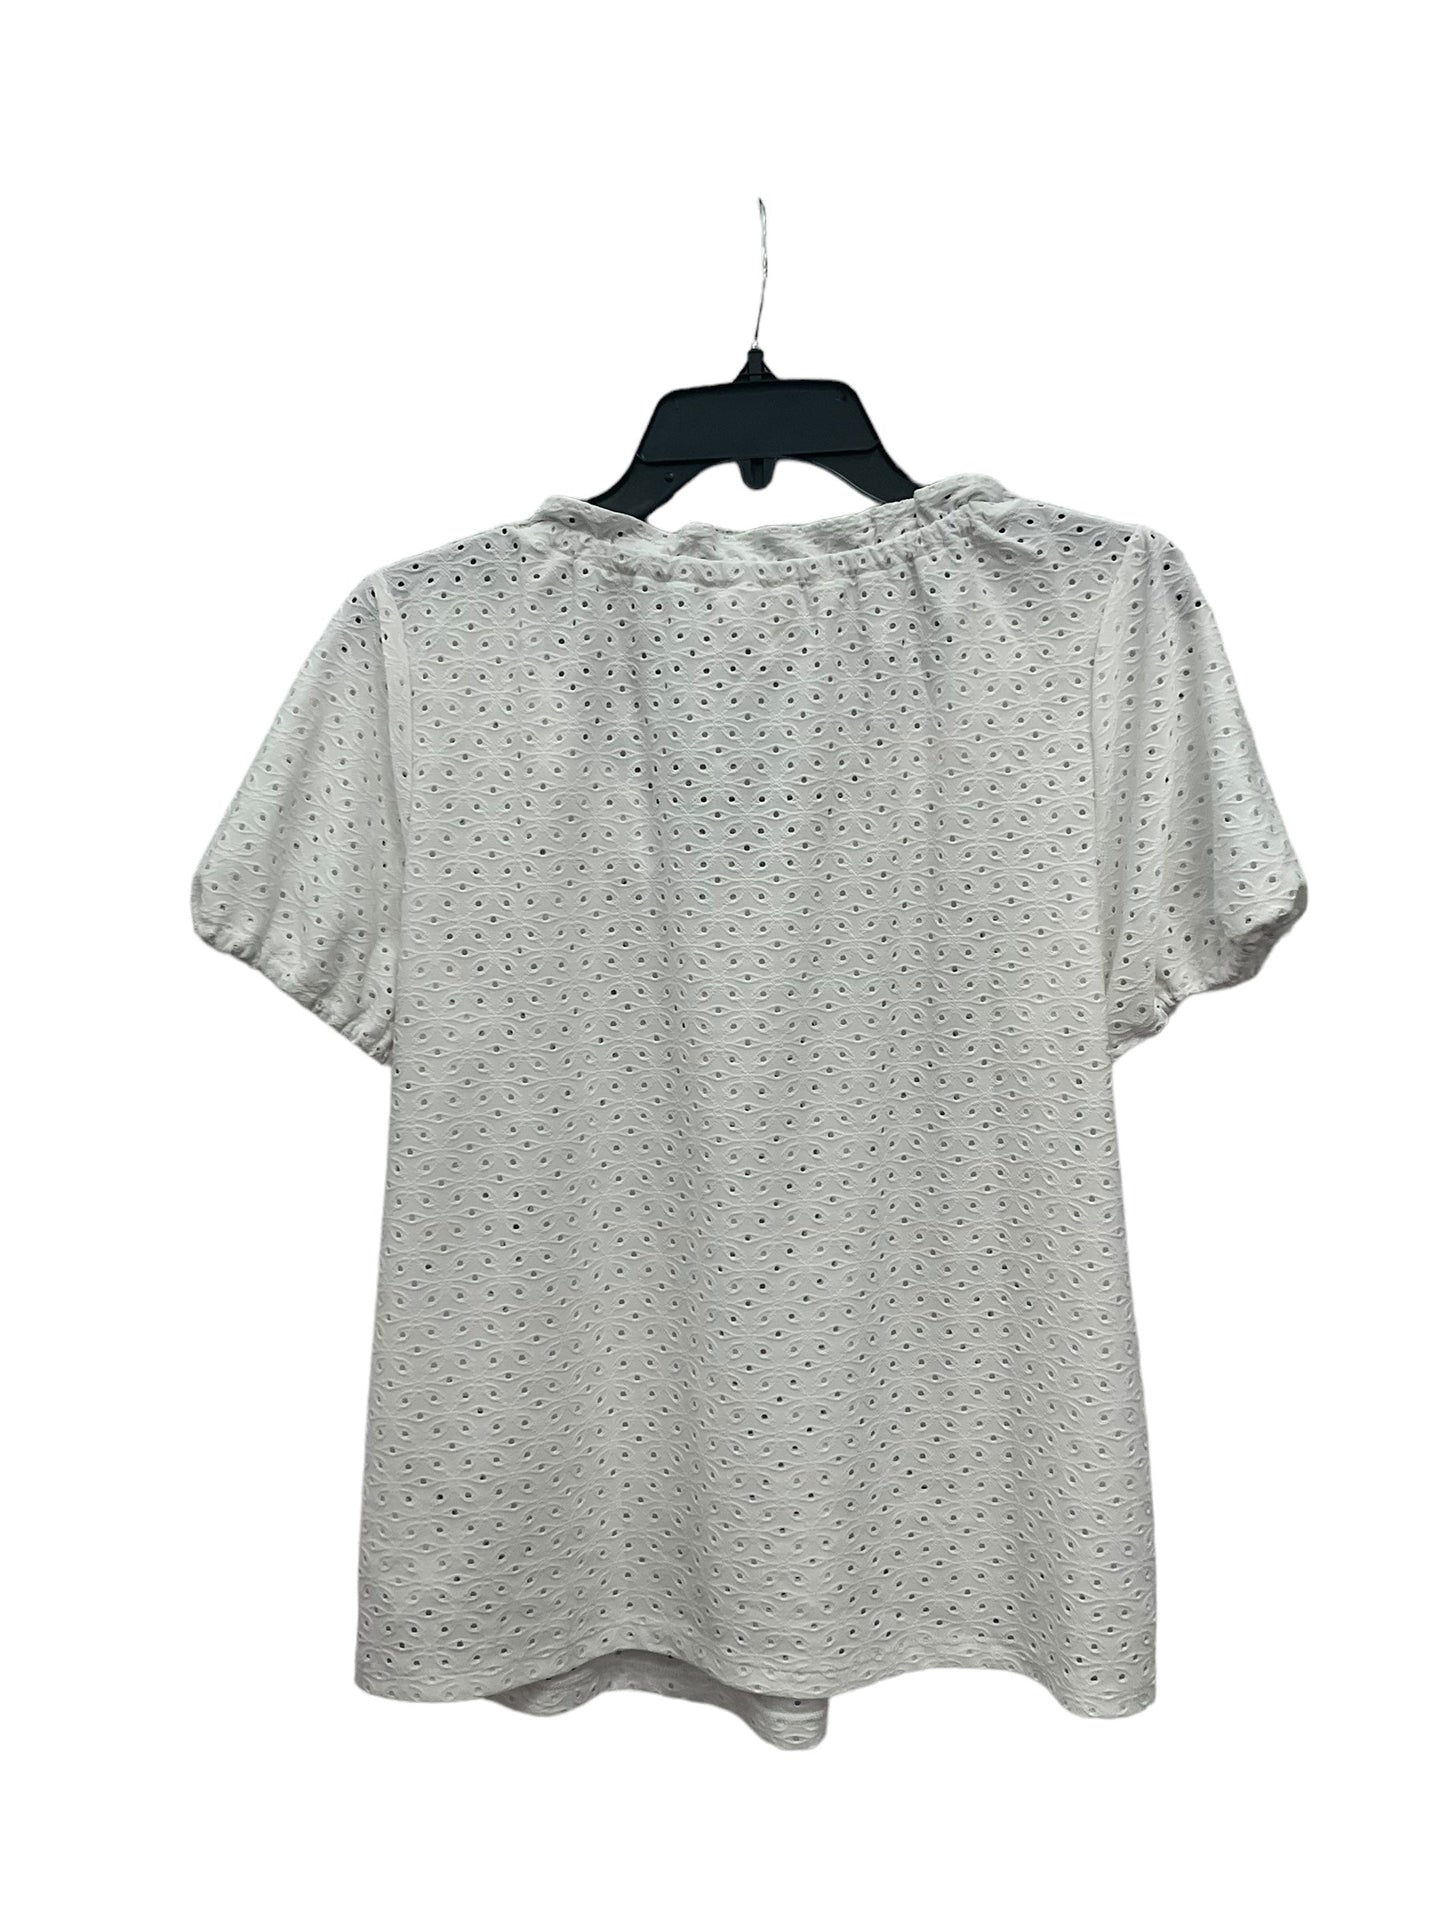 White Top Short Sleeve Michael By Michael Kors, Size S